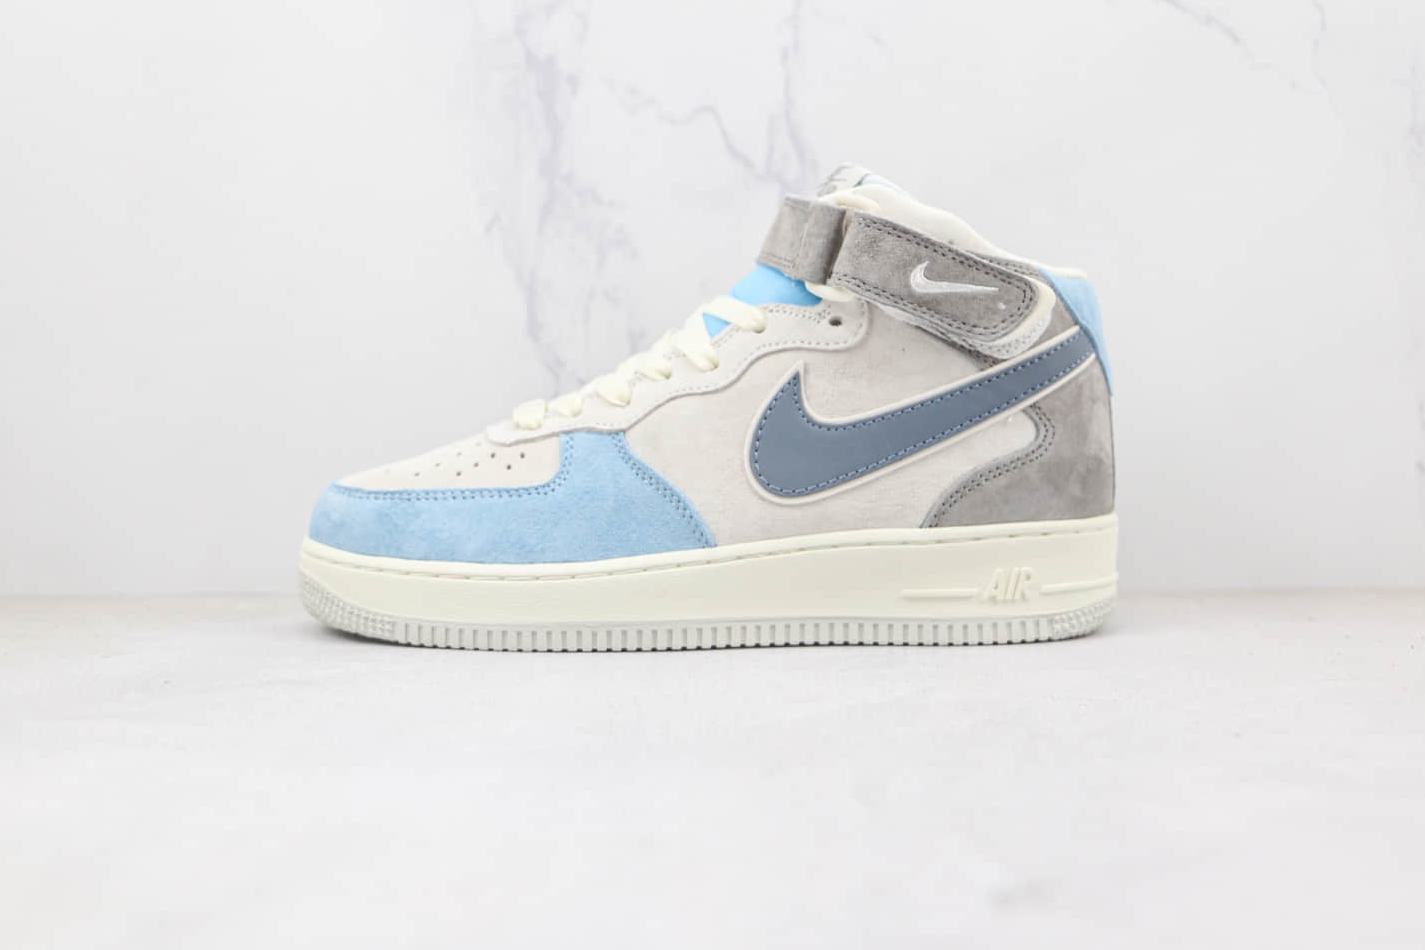 Nike Air Force 1 07 Mid Light Grey Blue White Shoes AL6896-559 - Stylish and Classic Footwear for Men and Women